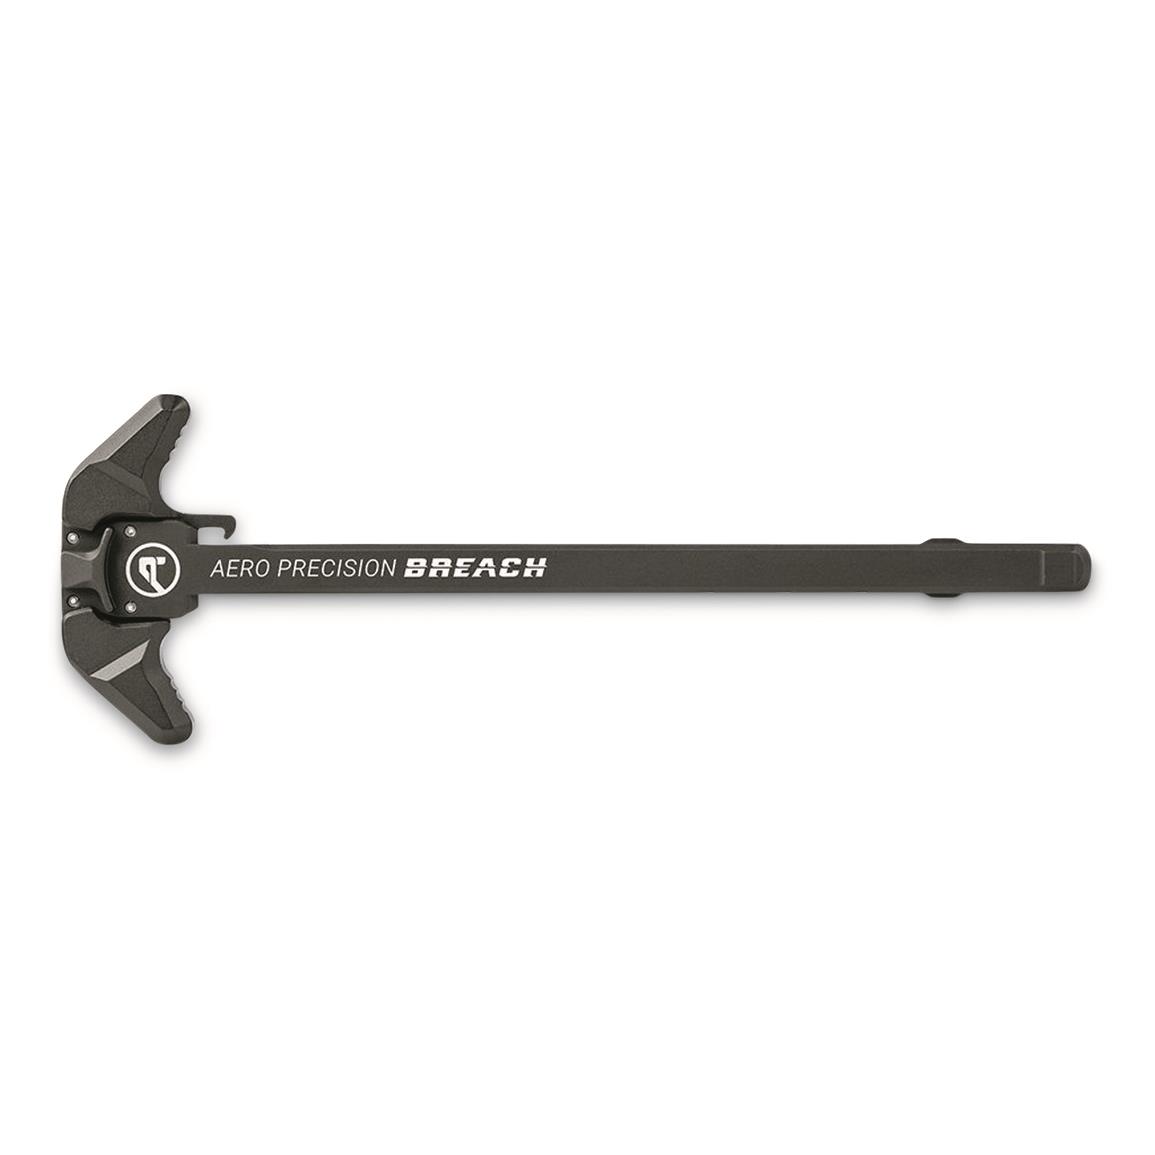 Aero Precision AR-15 Breach Ambidextrous Charging Handle with Large Lever, Black